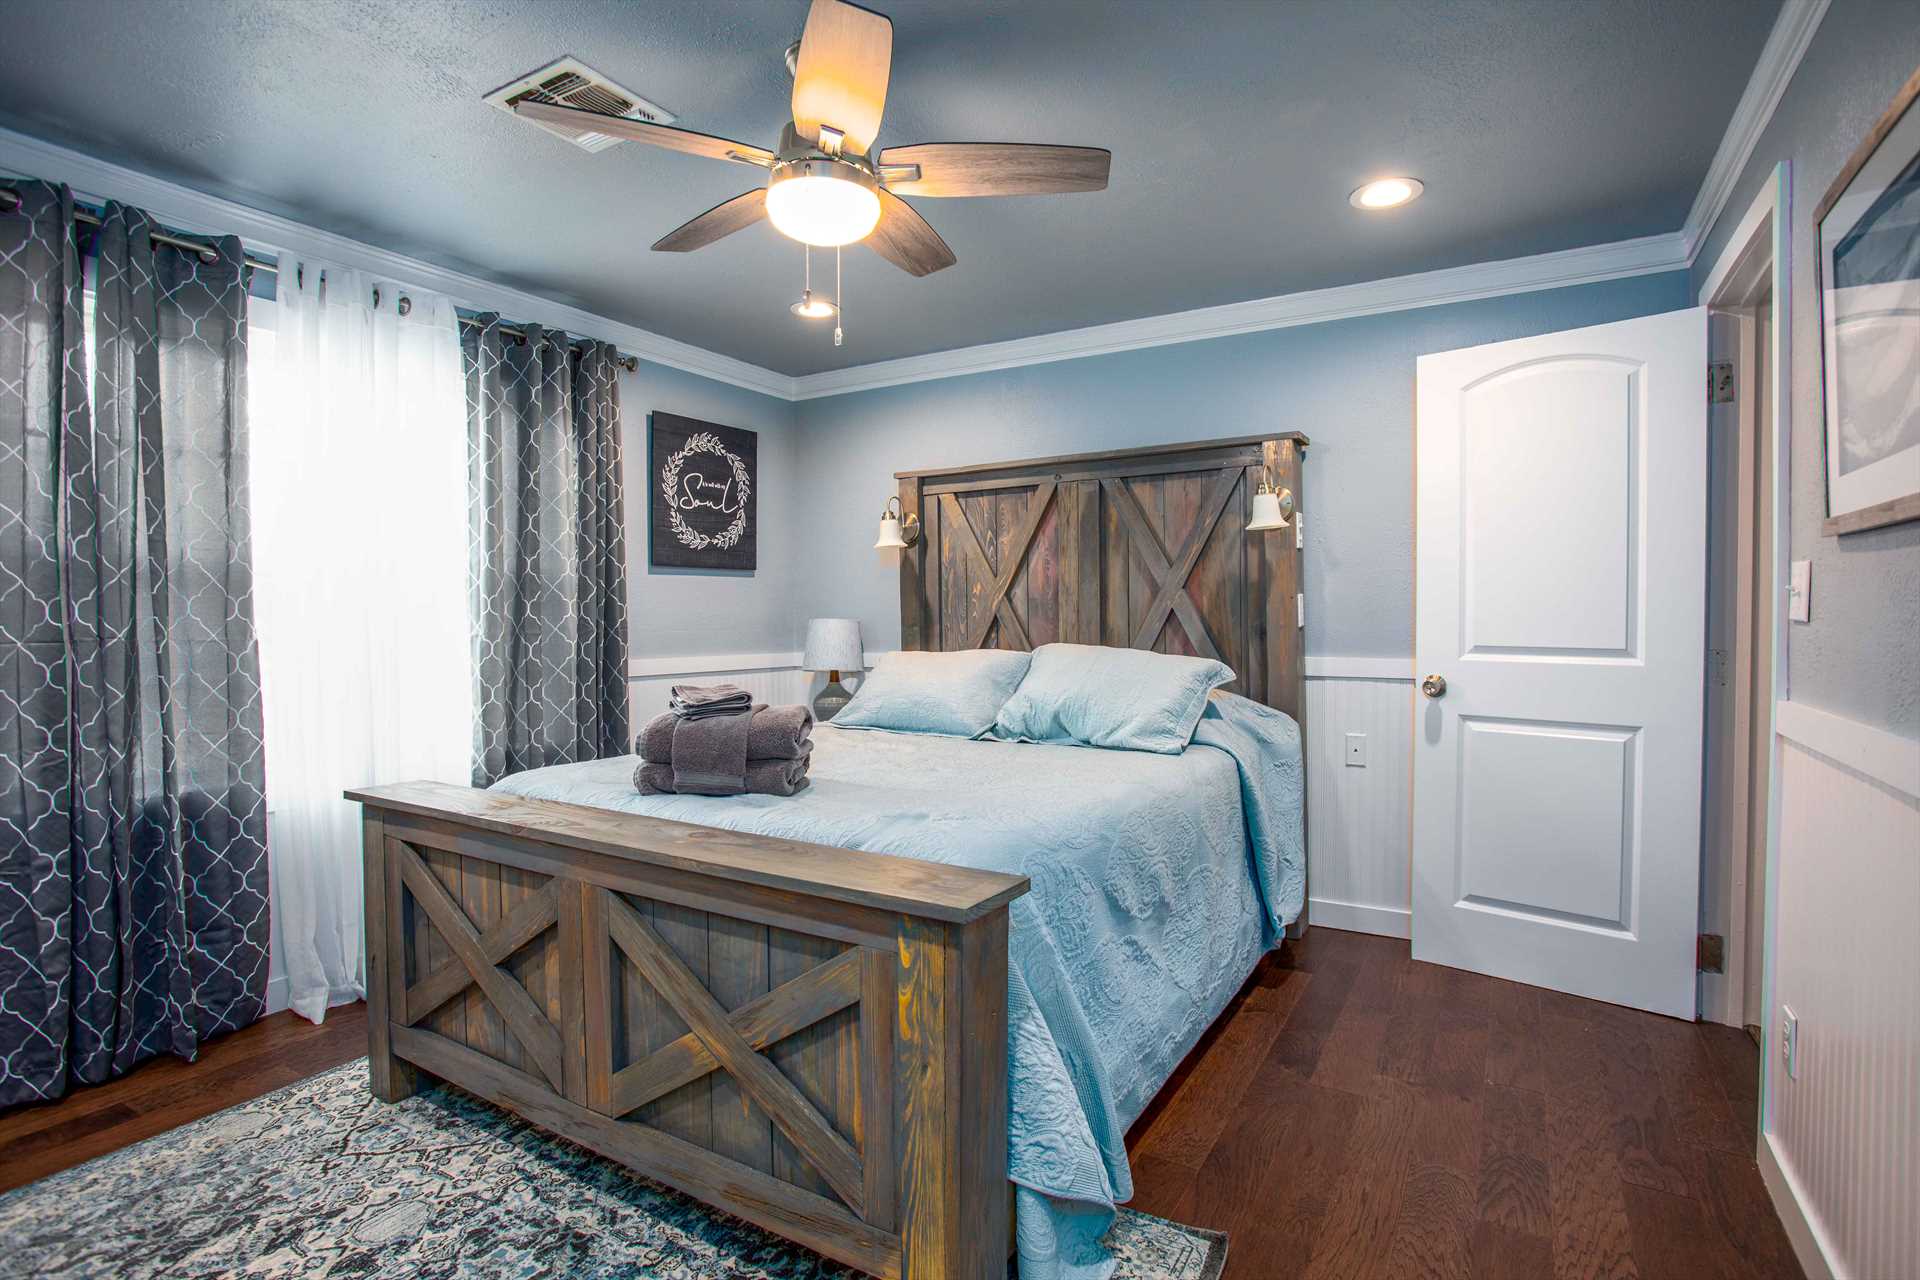                                                 Barn door head and foot boards on the comfy queen bed in the master bedroom add to the country touches throughout the house.